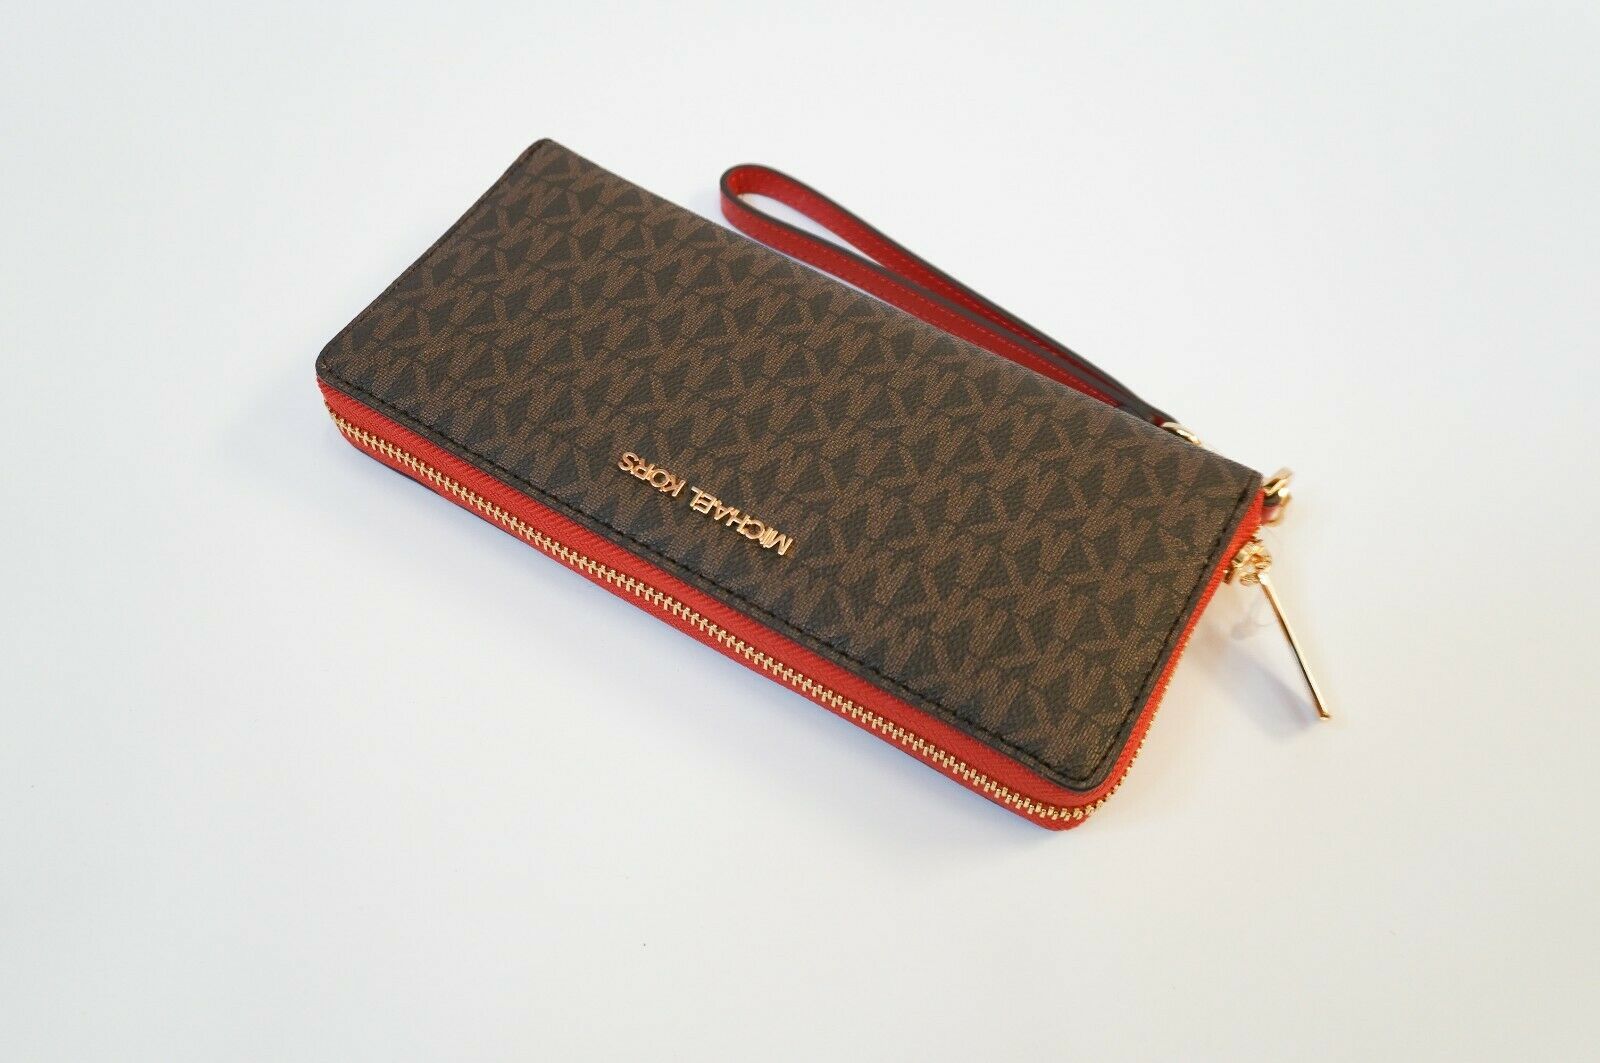 Nwt Michael Kors Mk Jet Set Travel Zip Continental Leather Wallet Red